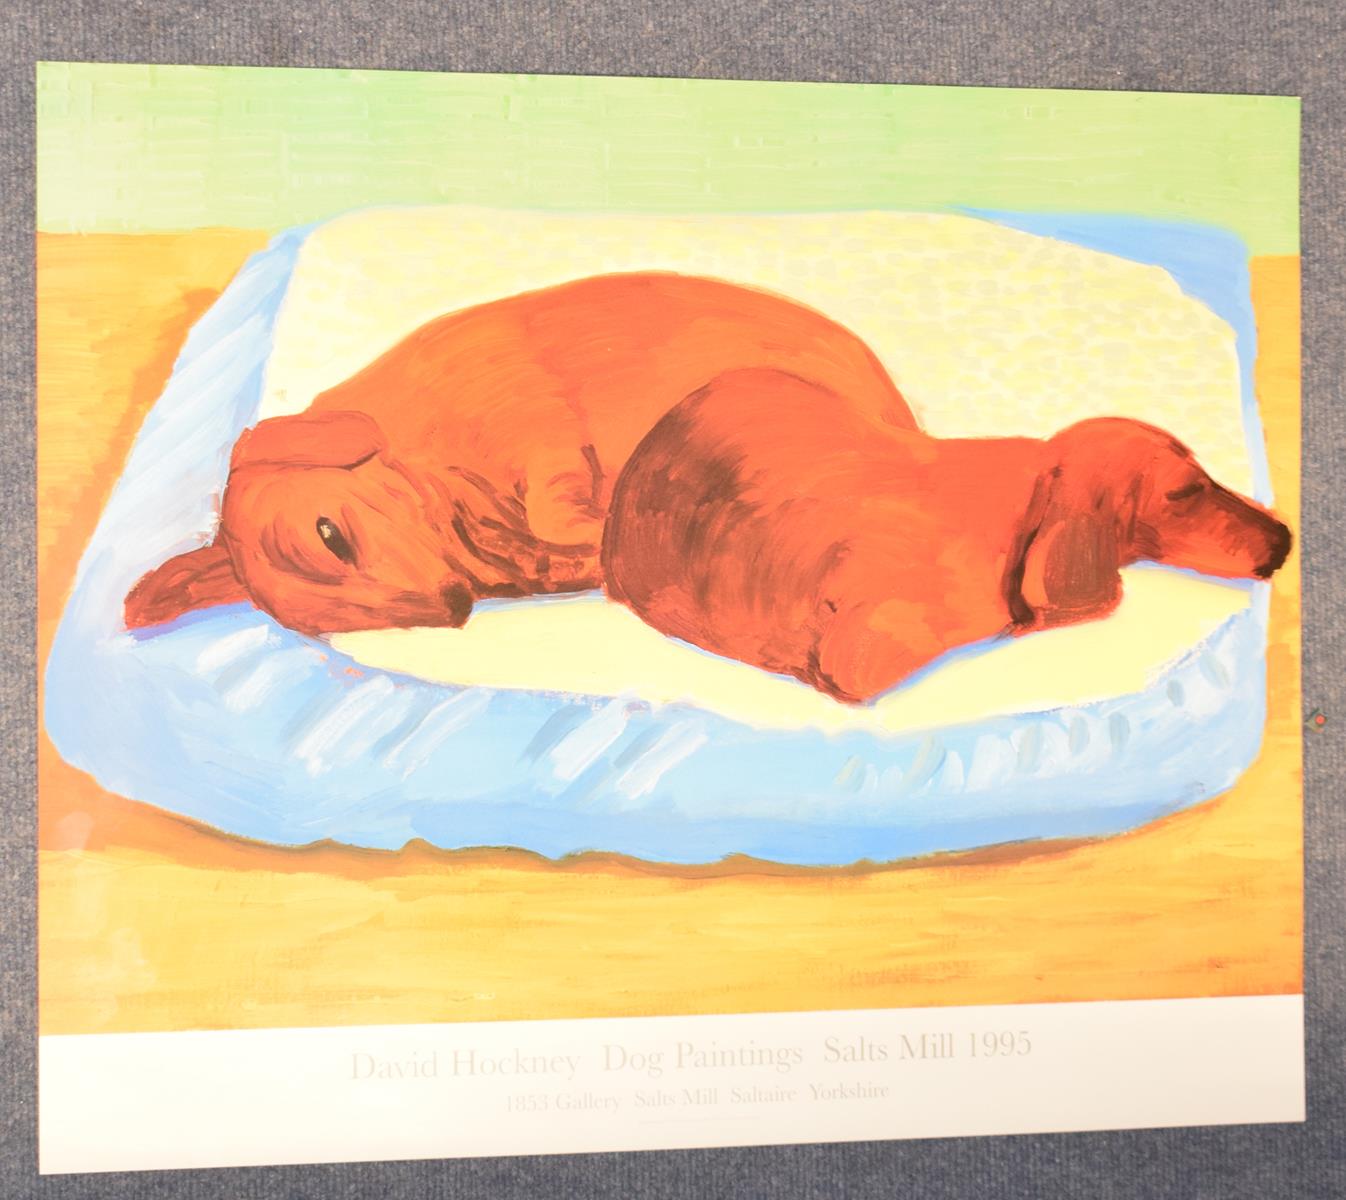 After David Hockney, dog paintings, Salts Mill 1995, colour poster, 53 x 65 cm and another (both